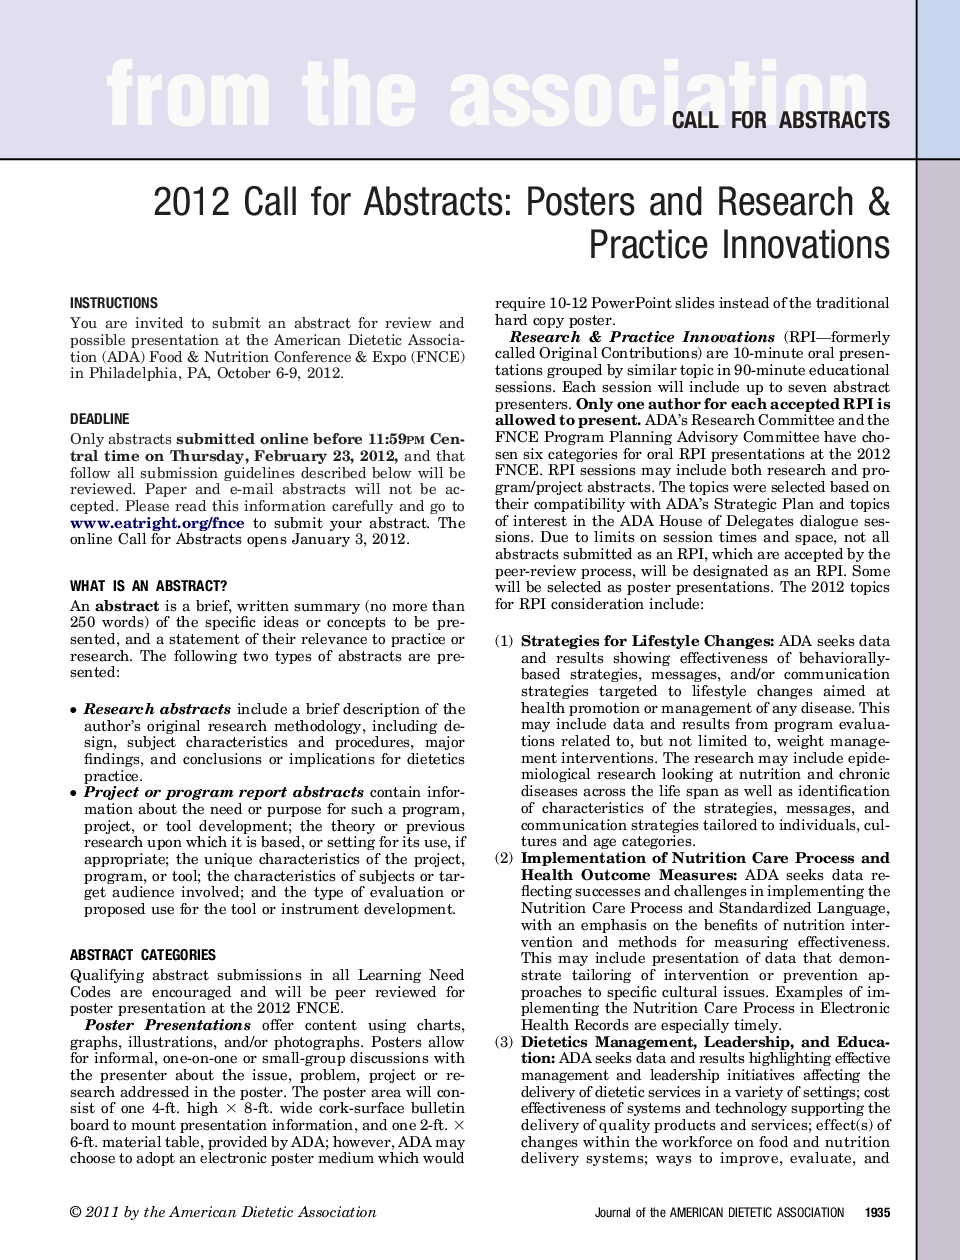 2012 Call for Abstracts: Posters and Research & Practice Innovations